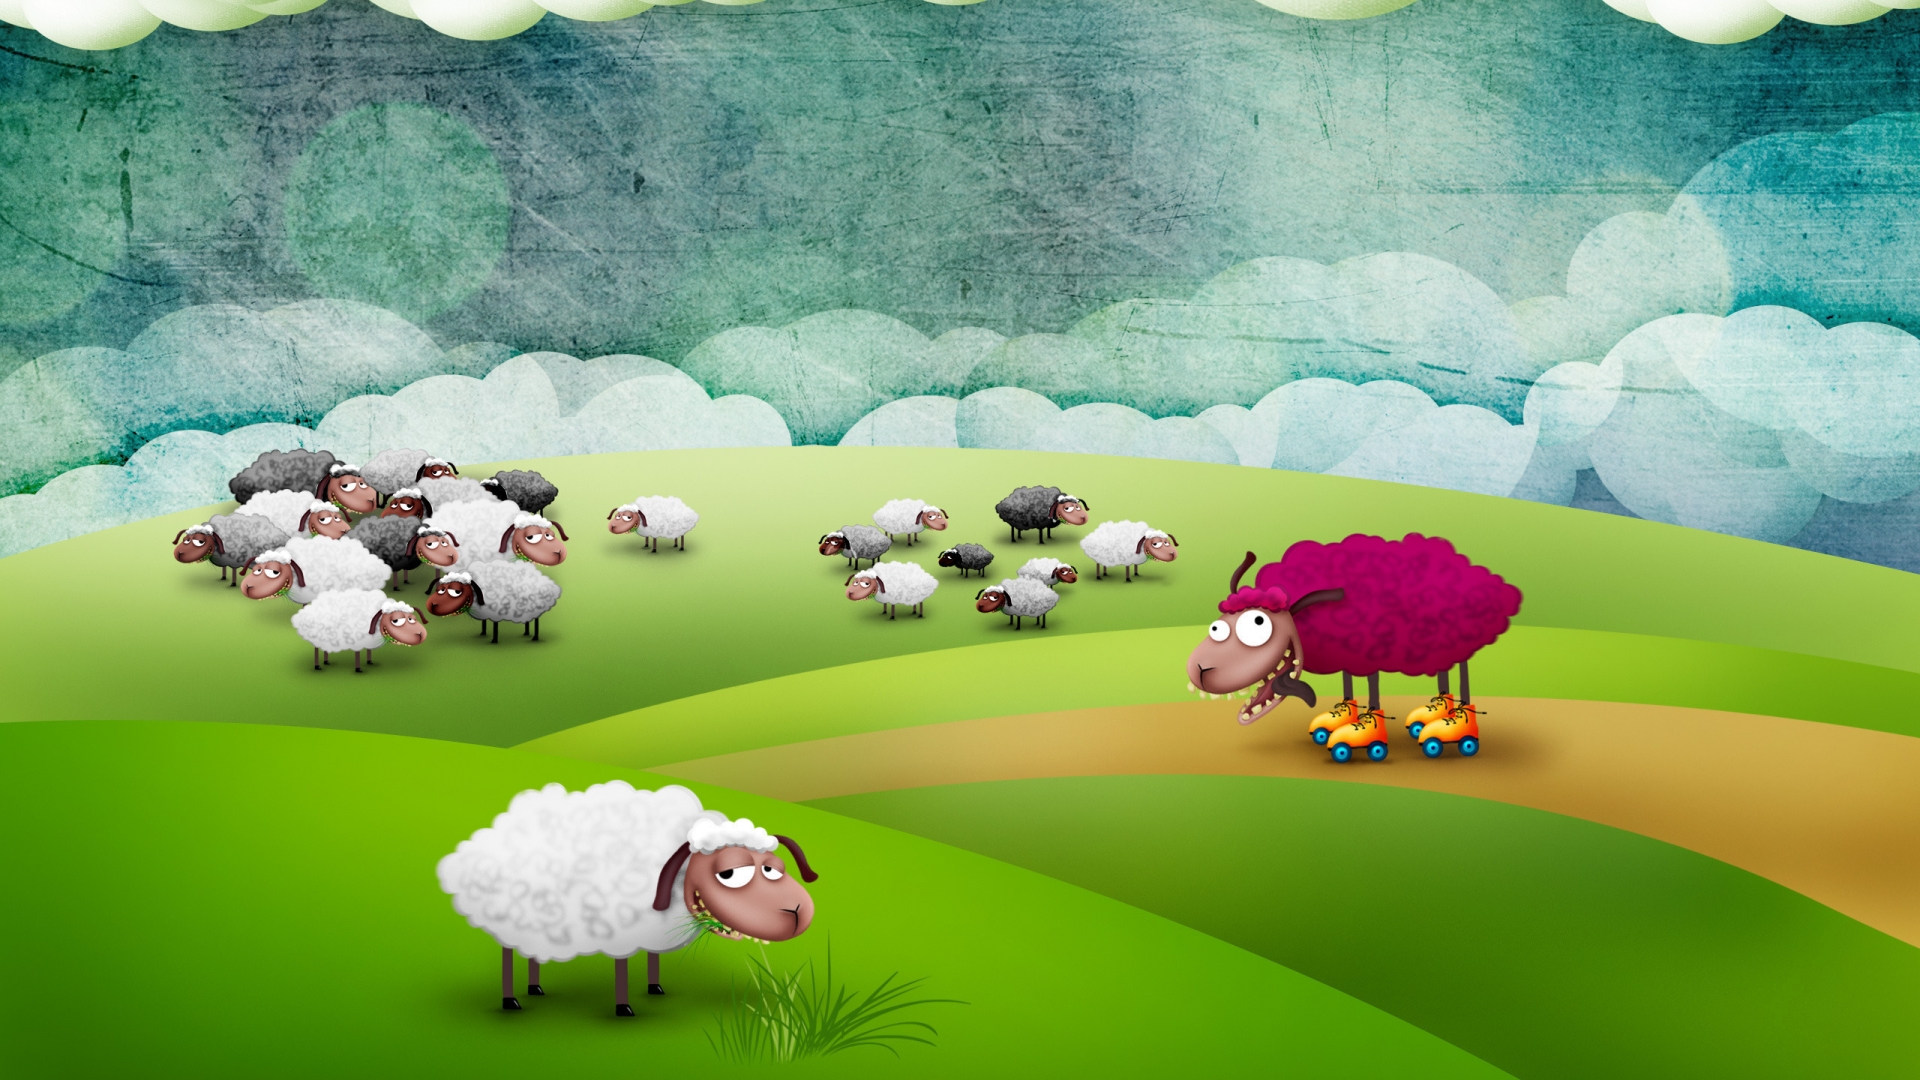 Crazy Sheep to Pasture for 1920 x 1080 HDTV 1080p resolution